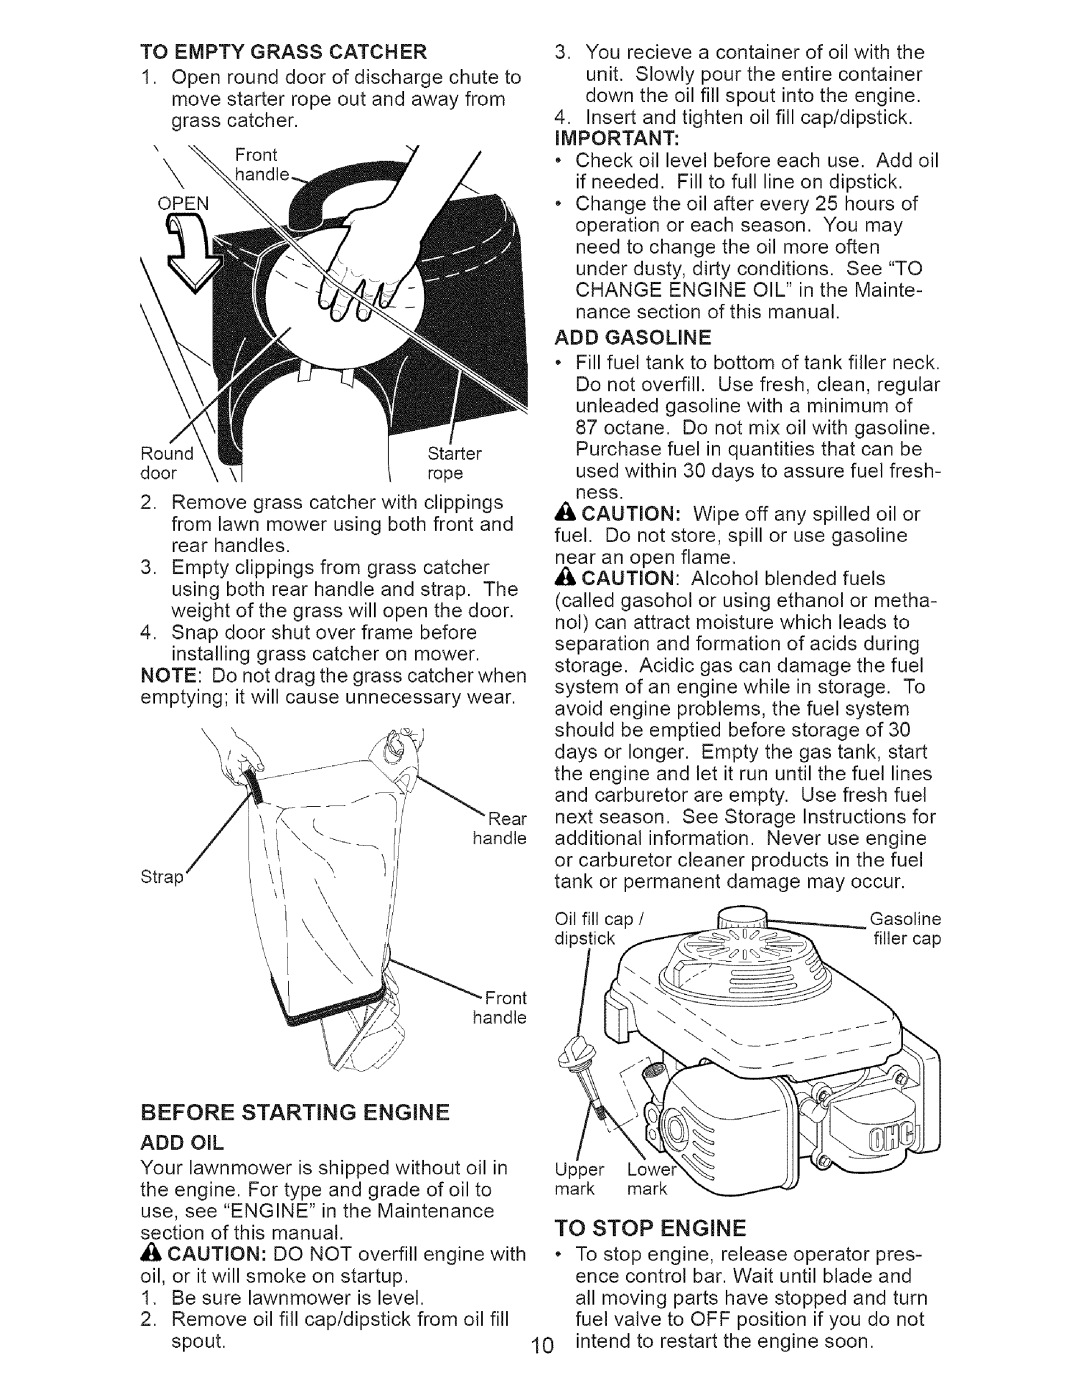 Craftsman 917.371812 owner manual To Empty Grass Catcher, Before Starting Engine, Add Gasoline 